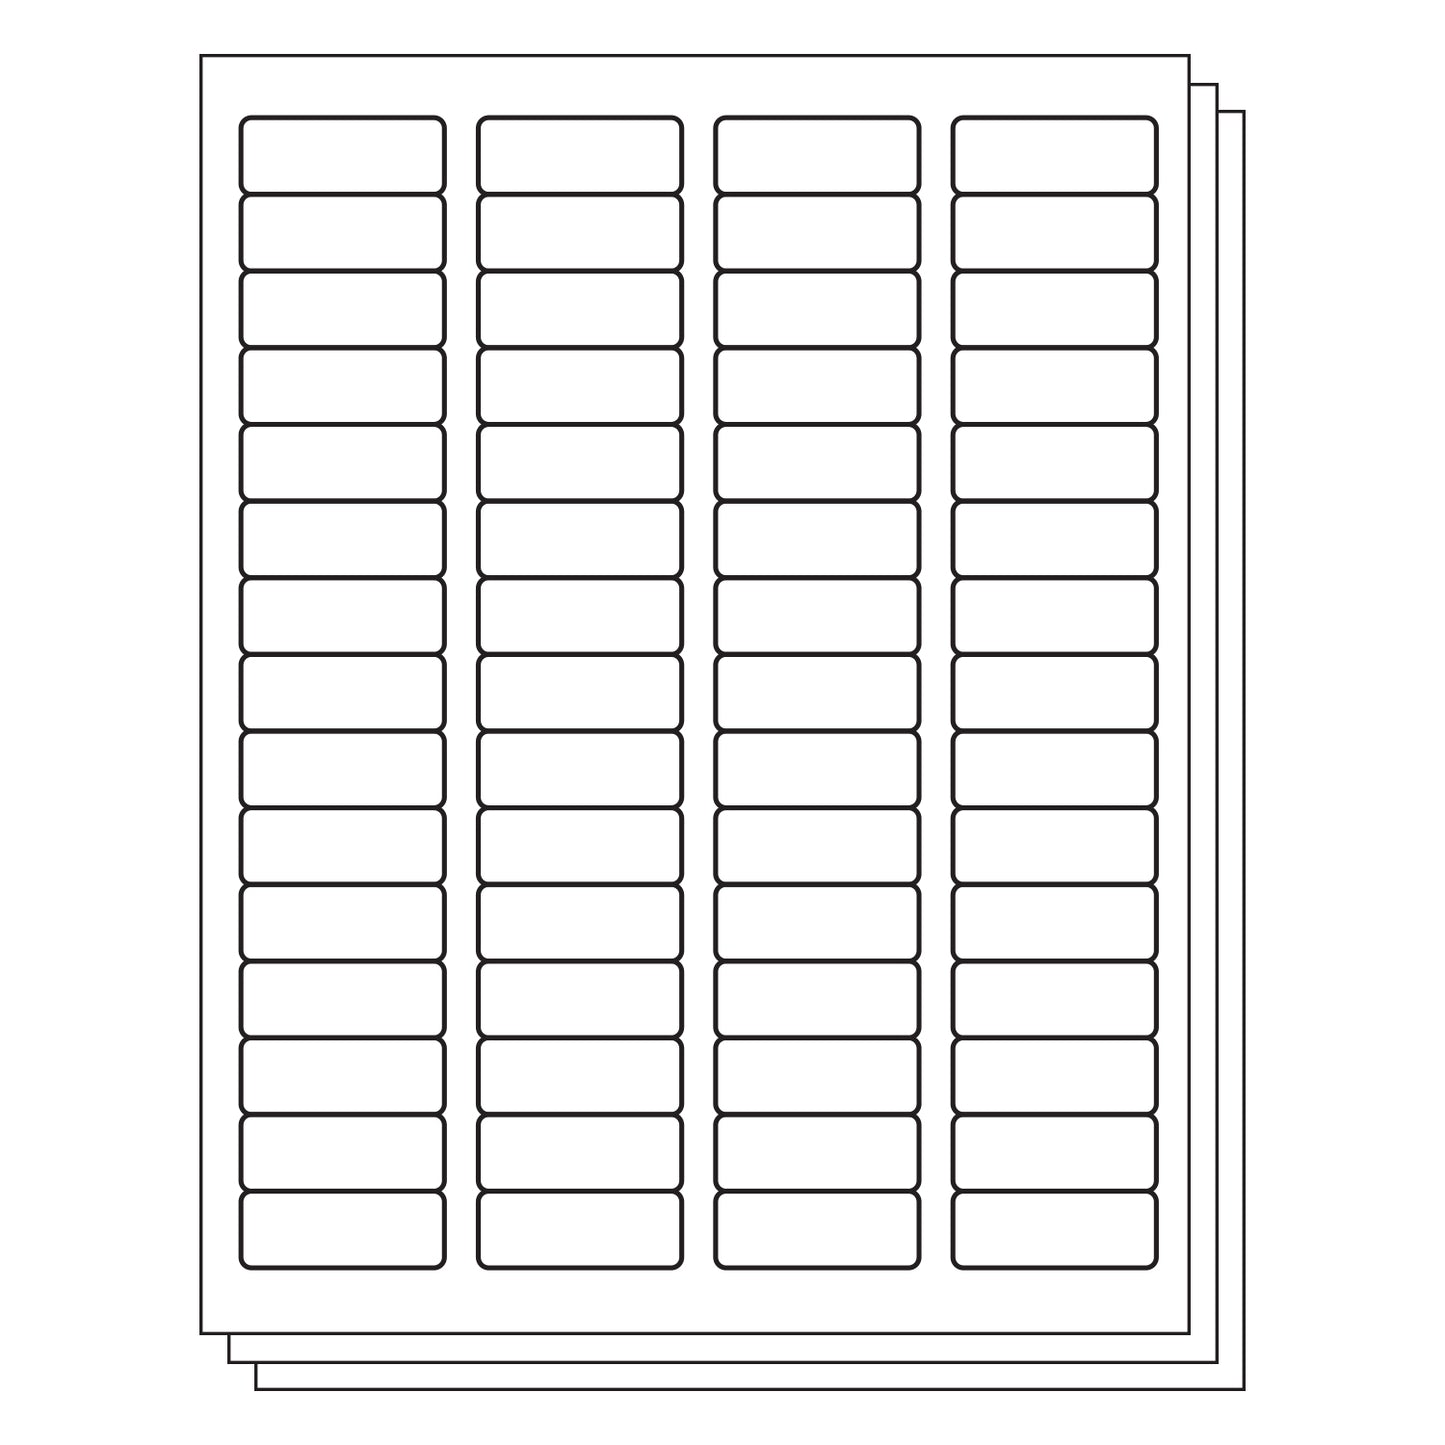 60UP | 1.75 x 0.66 inch Blank Rectangle Labels - 60 Labels per Sheet